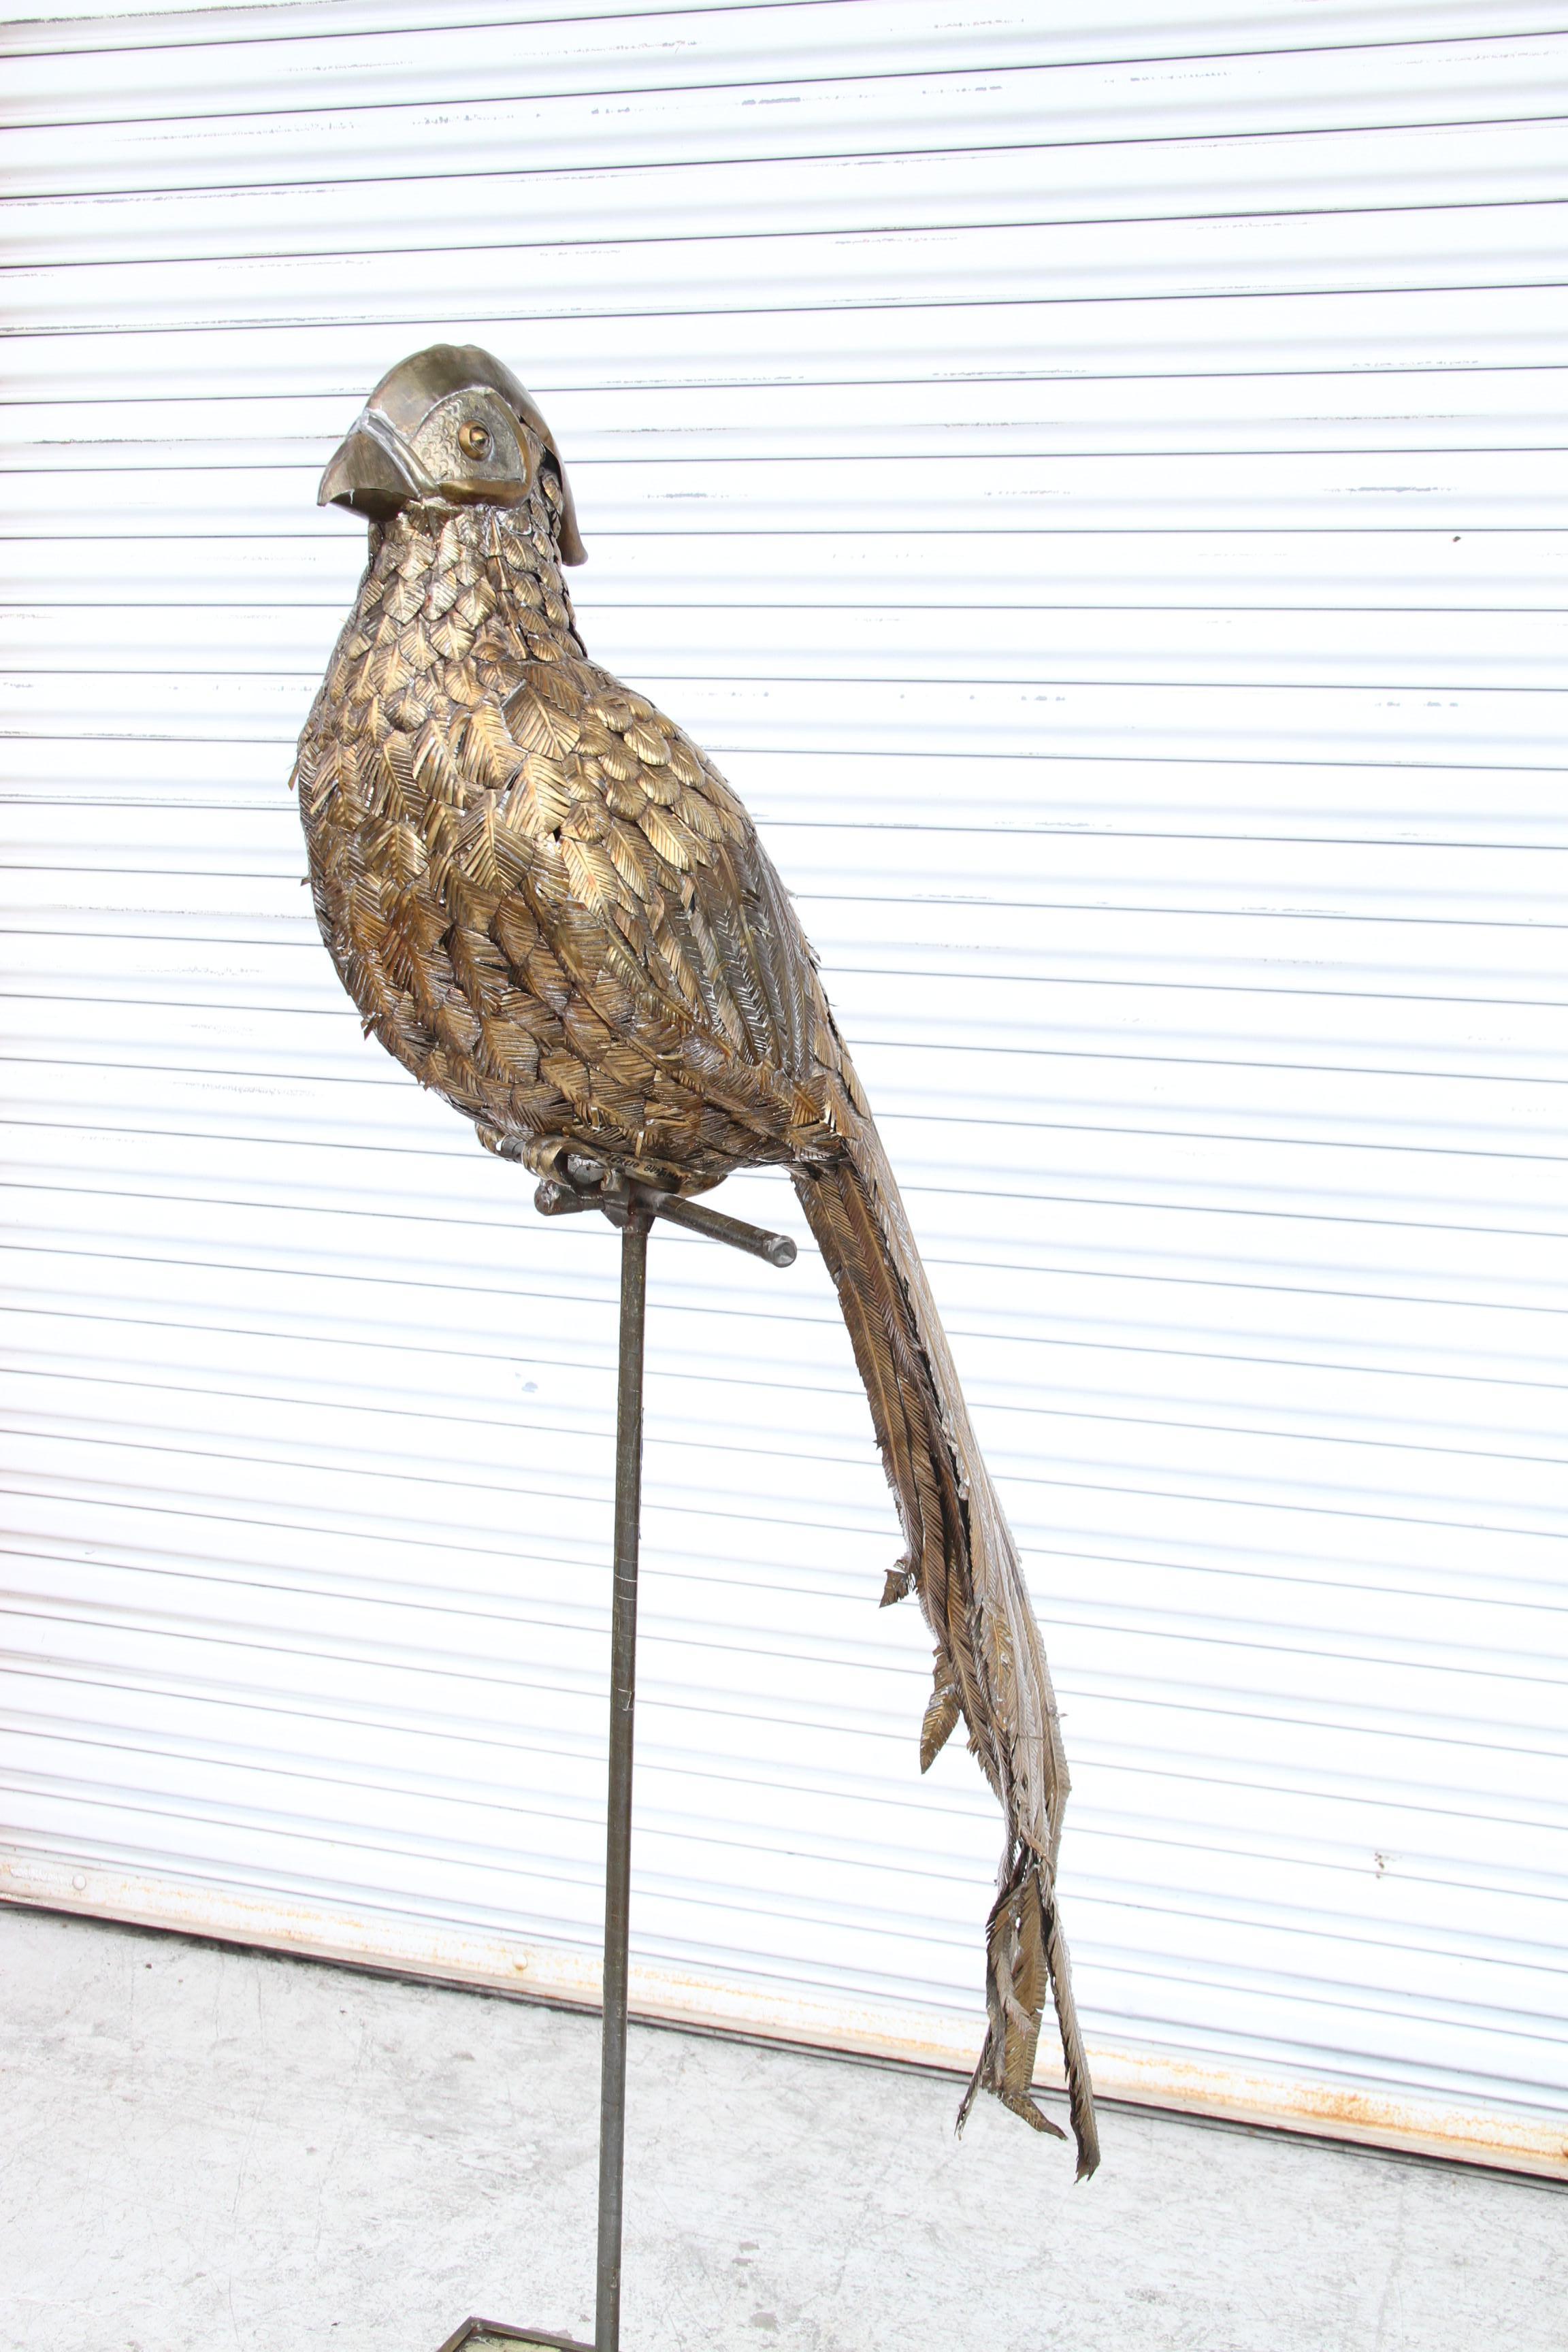 5FT Large Sergio Bustamante Pheasant Bird Sculpture 54/100 Signed

Sergio Bustamante is a world reknown Artist and sculptor with art collected internationally.
This brass and copper sculpture stands over five feet tall and is mounted on a weighted